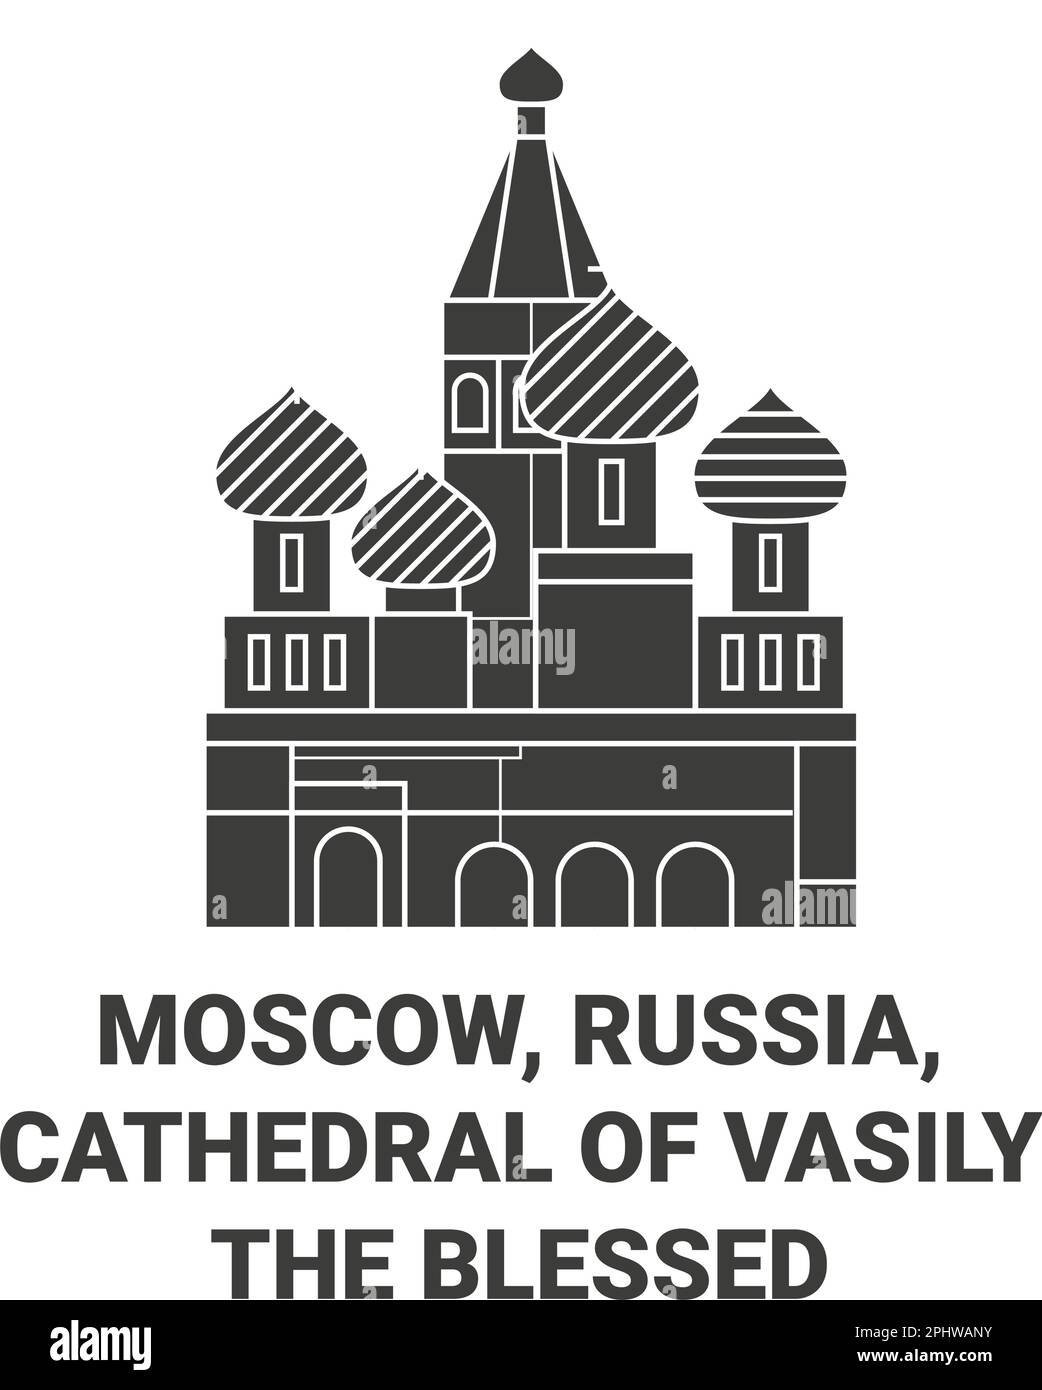 Russia, Moscow, Cathedral Of Vasily The Blessed travel landmark vector illustration Stock Vector